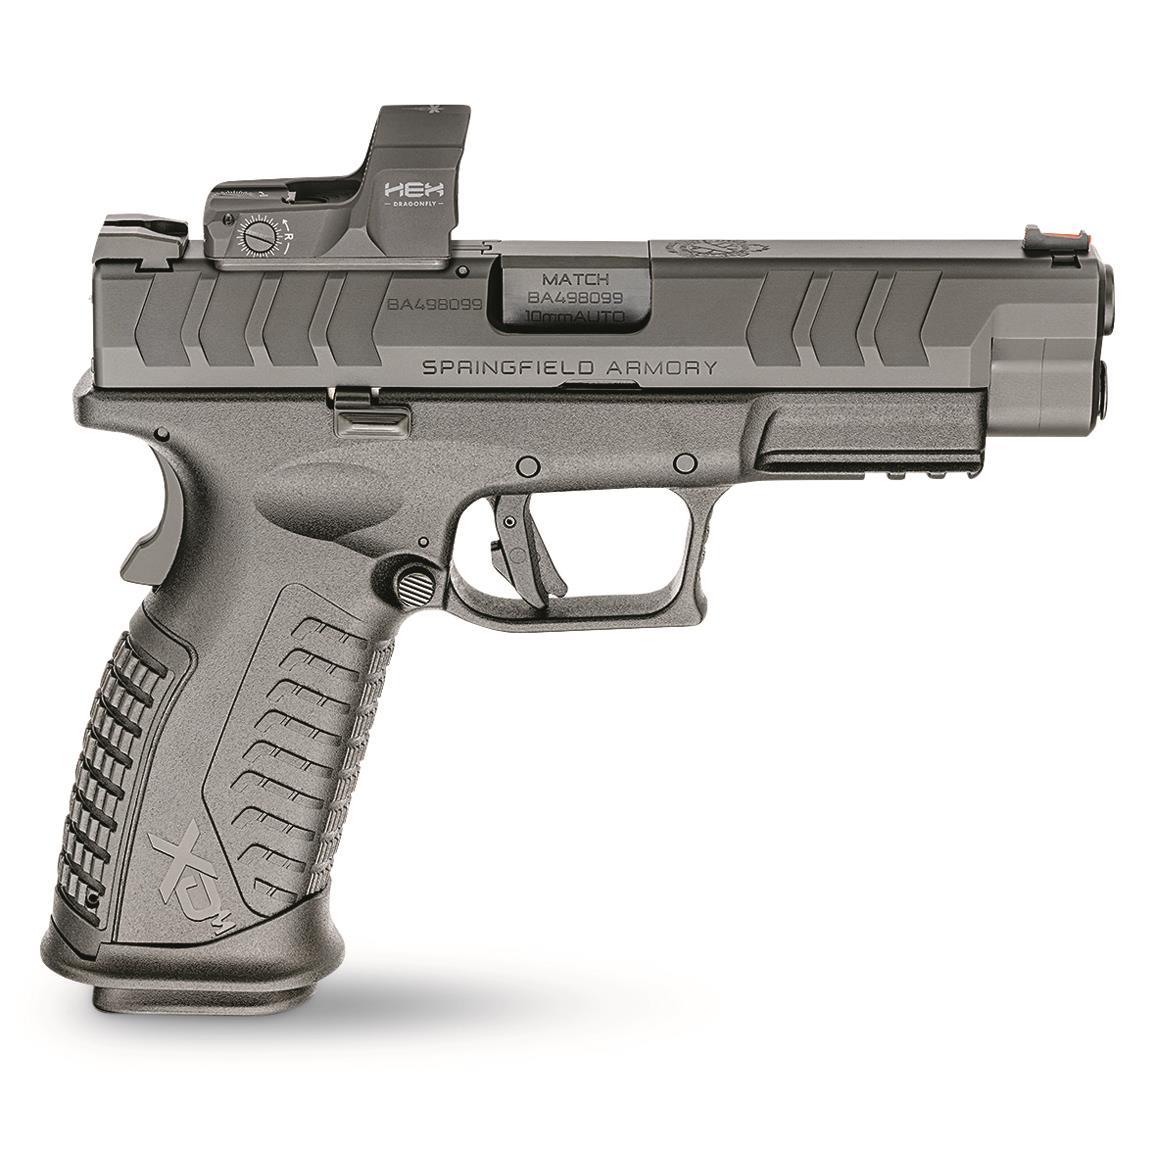 Springfield XD-M Elite 4.5" OSP, Semi-automatic, 10mm, 4.5" Barrel, Hex Dragonfly Red Dot, 16+1 Rds.